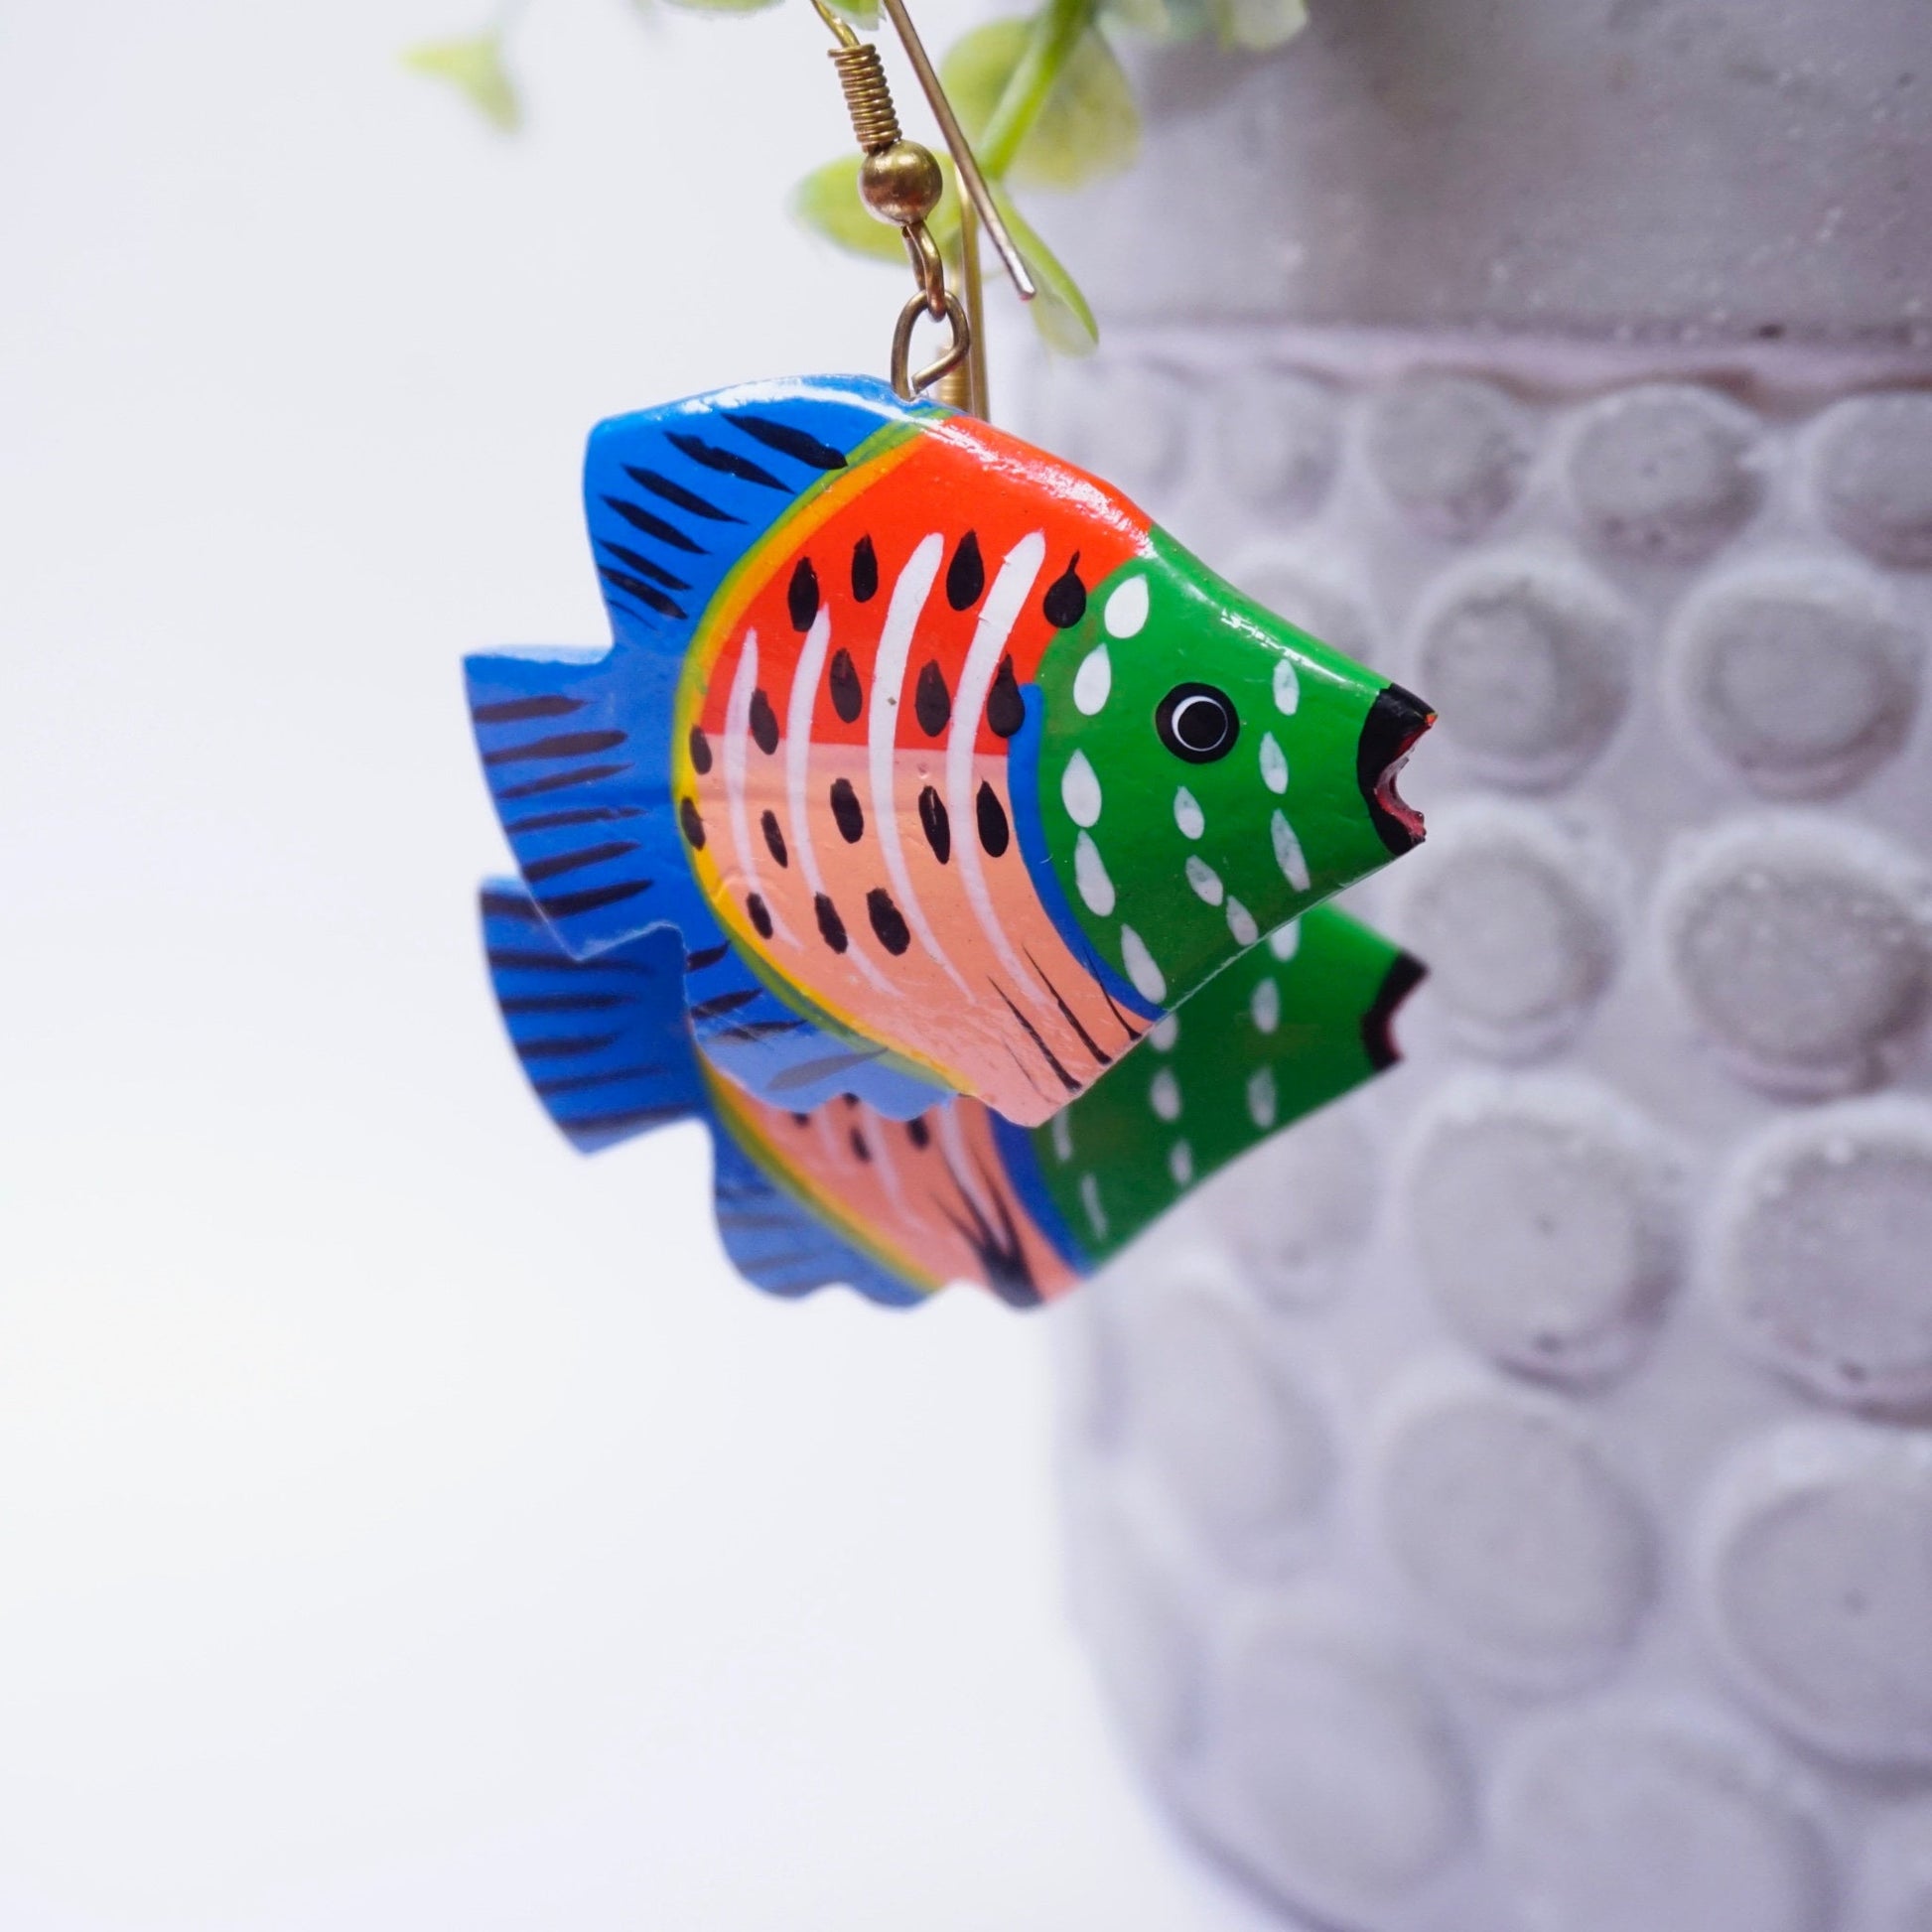 Colorful vintage wood carved fish earrings with vibrant painted details, handmade wooden dangle statement earrings hanging against a textured background.